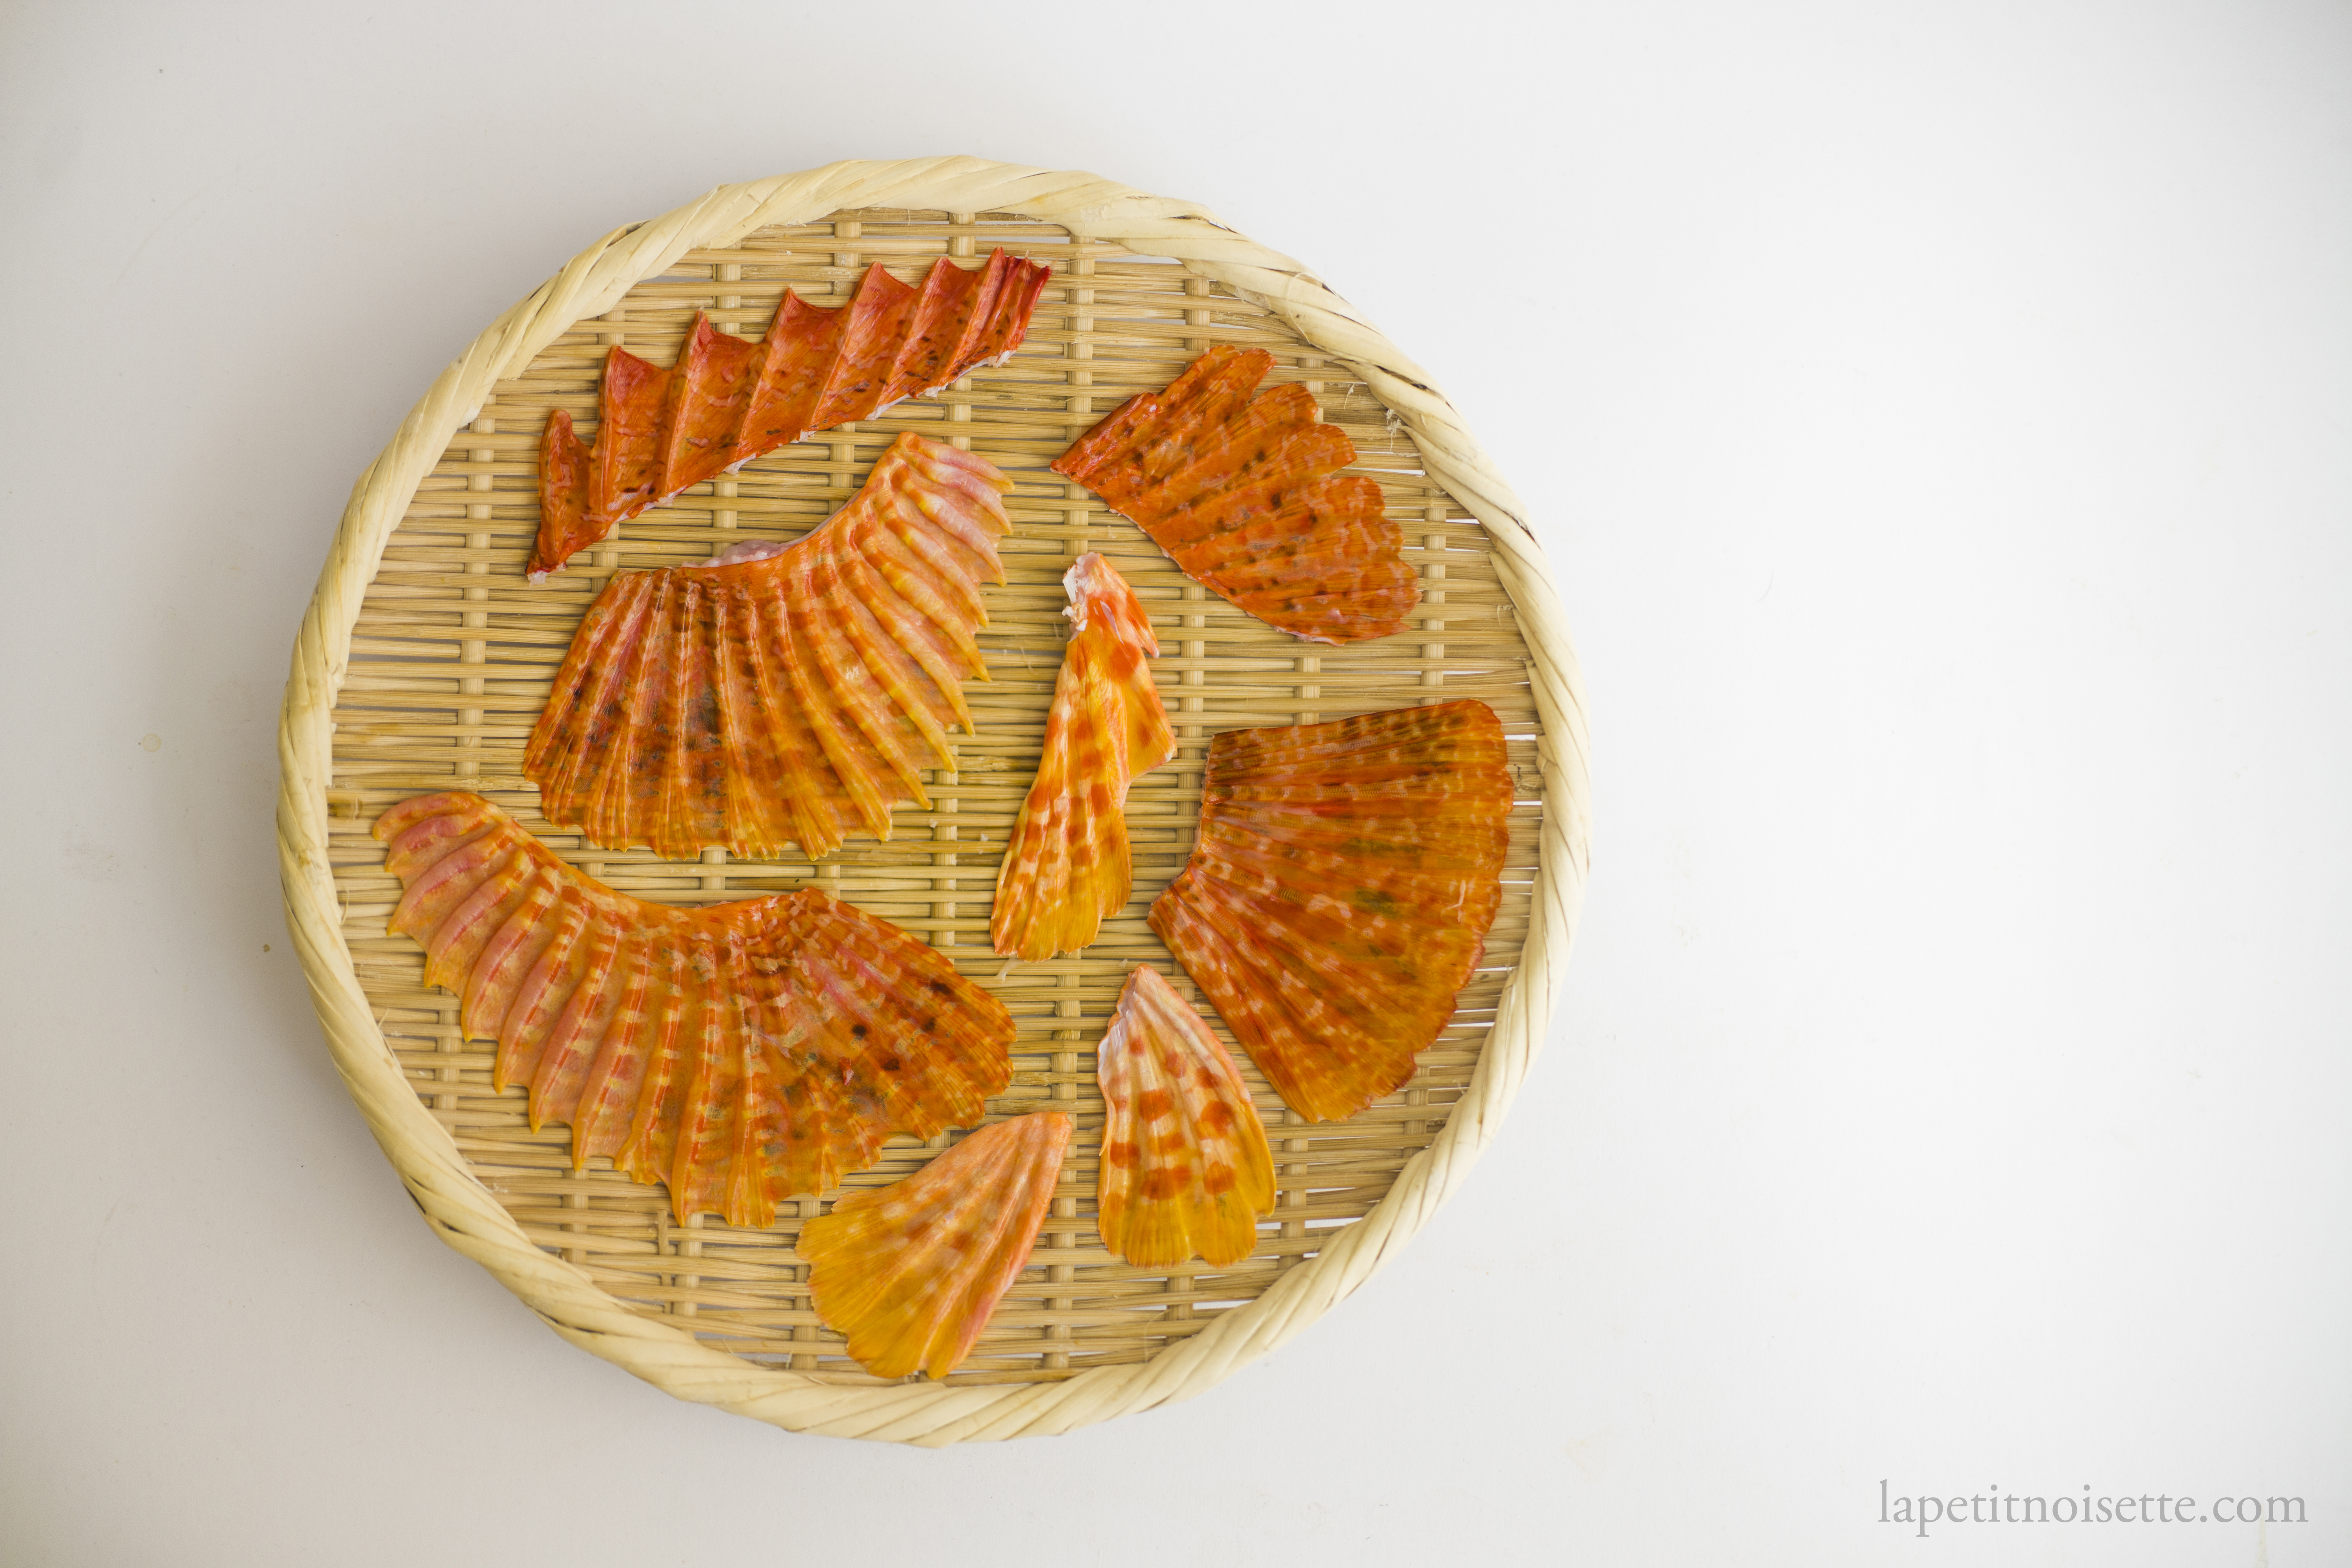 Japanese scorpionfish fins drying in the sun on a bamboo colander.